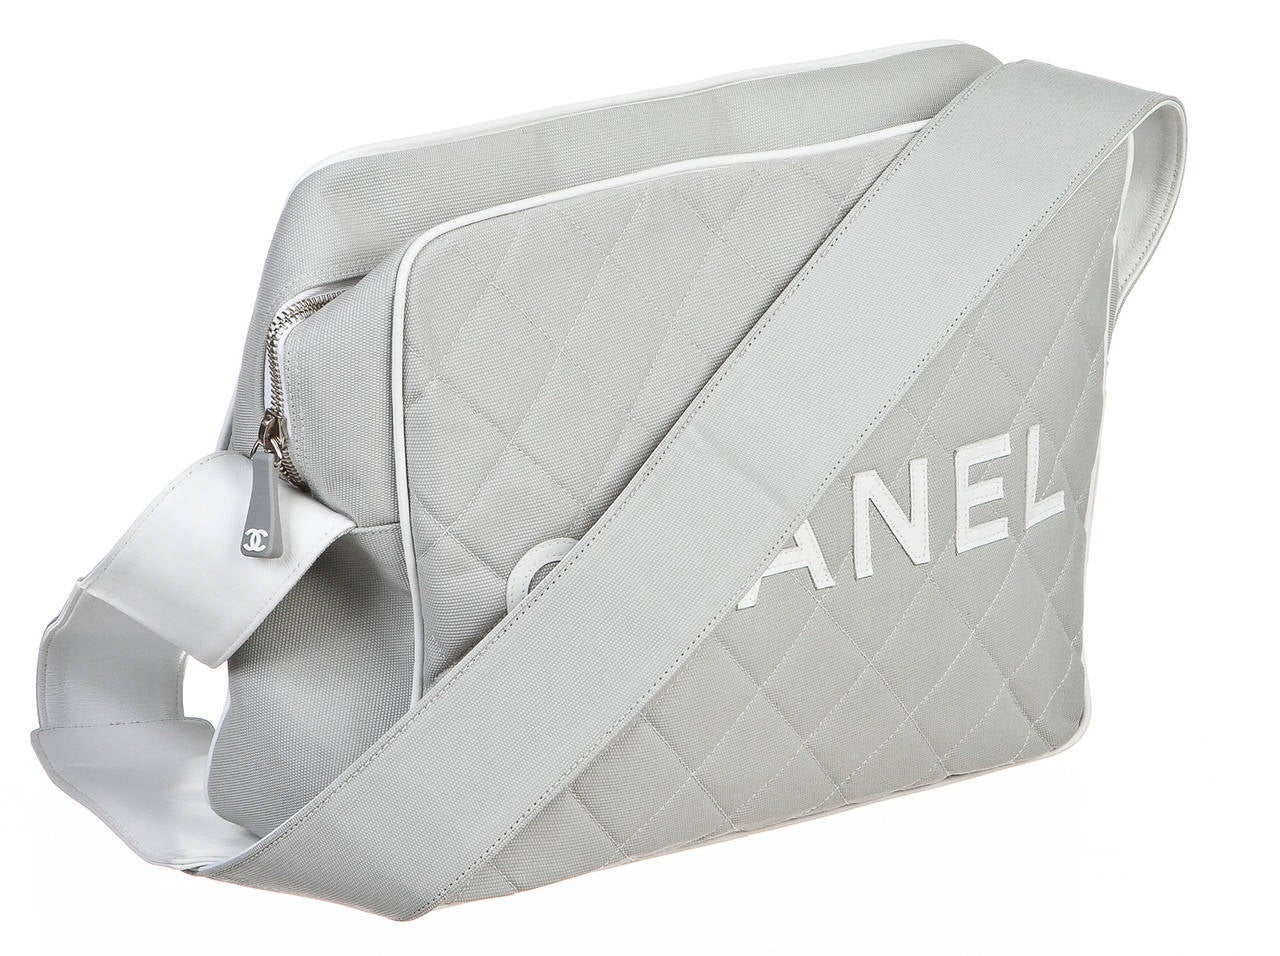 Easily carry your essentials in style and keep your hands free with this beautiful Chanel handbag. Crafted from a stunning gray canvas and white leather trim, this bag features a long shoulder strap as well for a comfortable wear throughout the day.